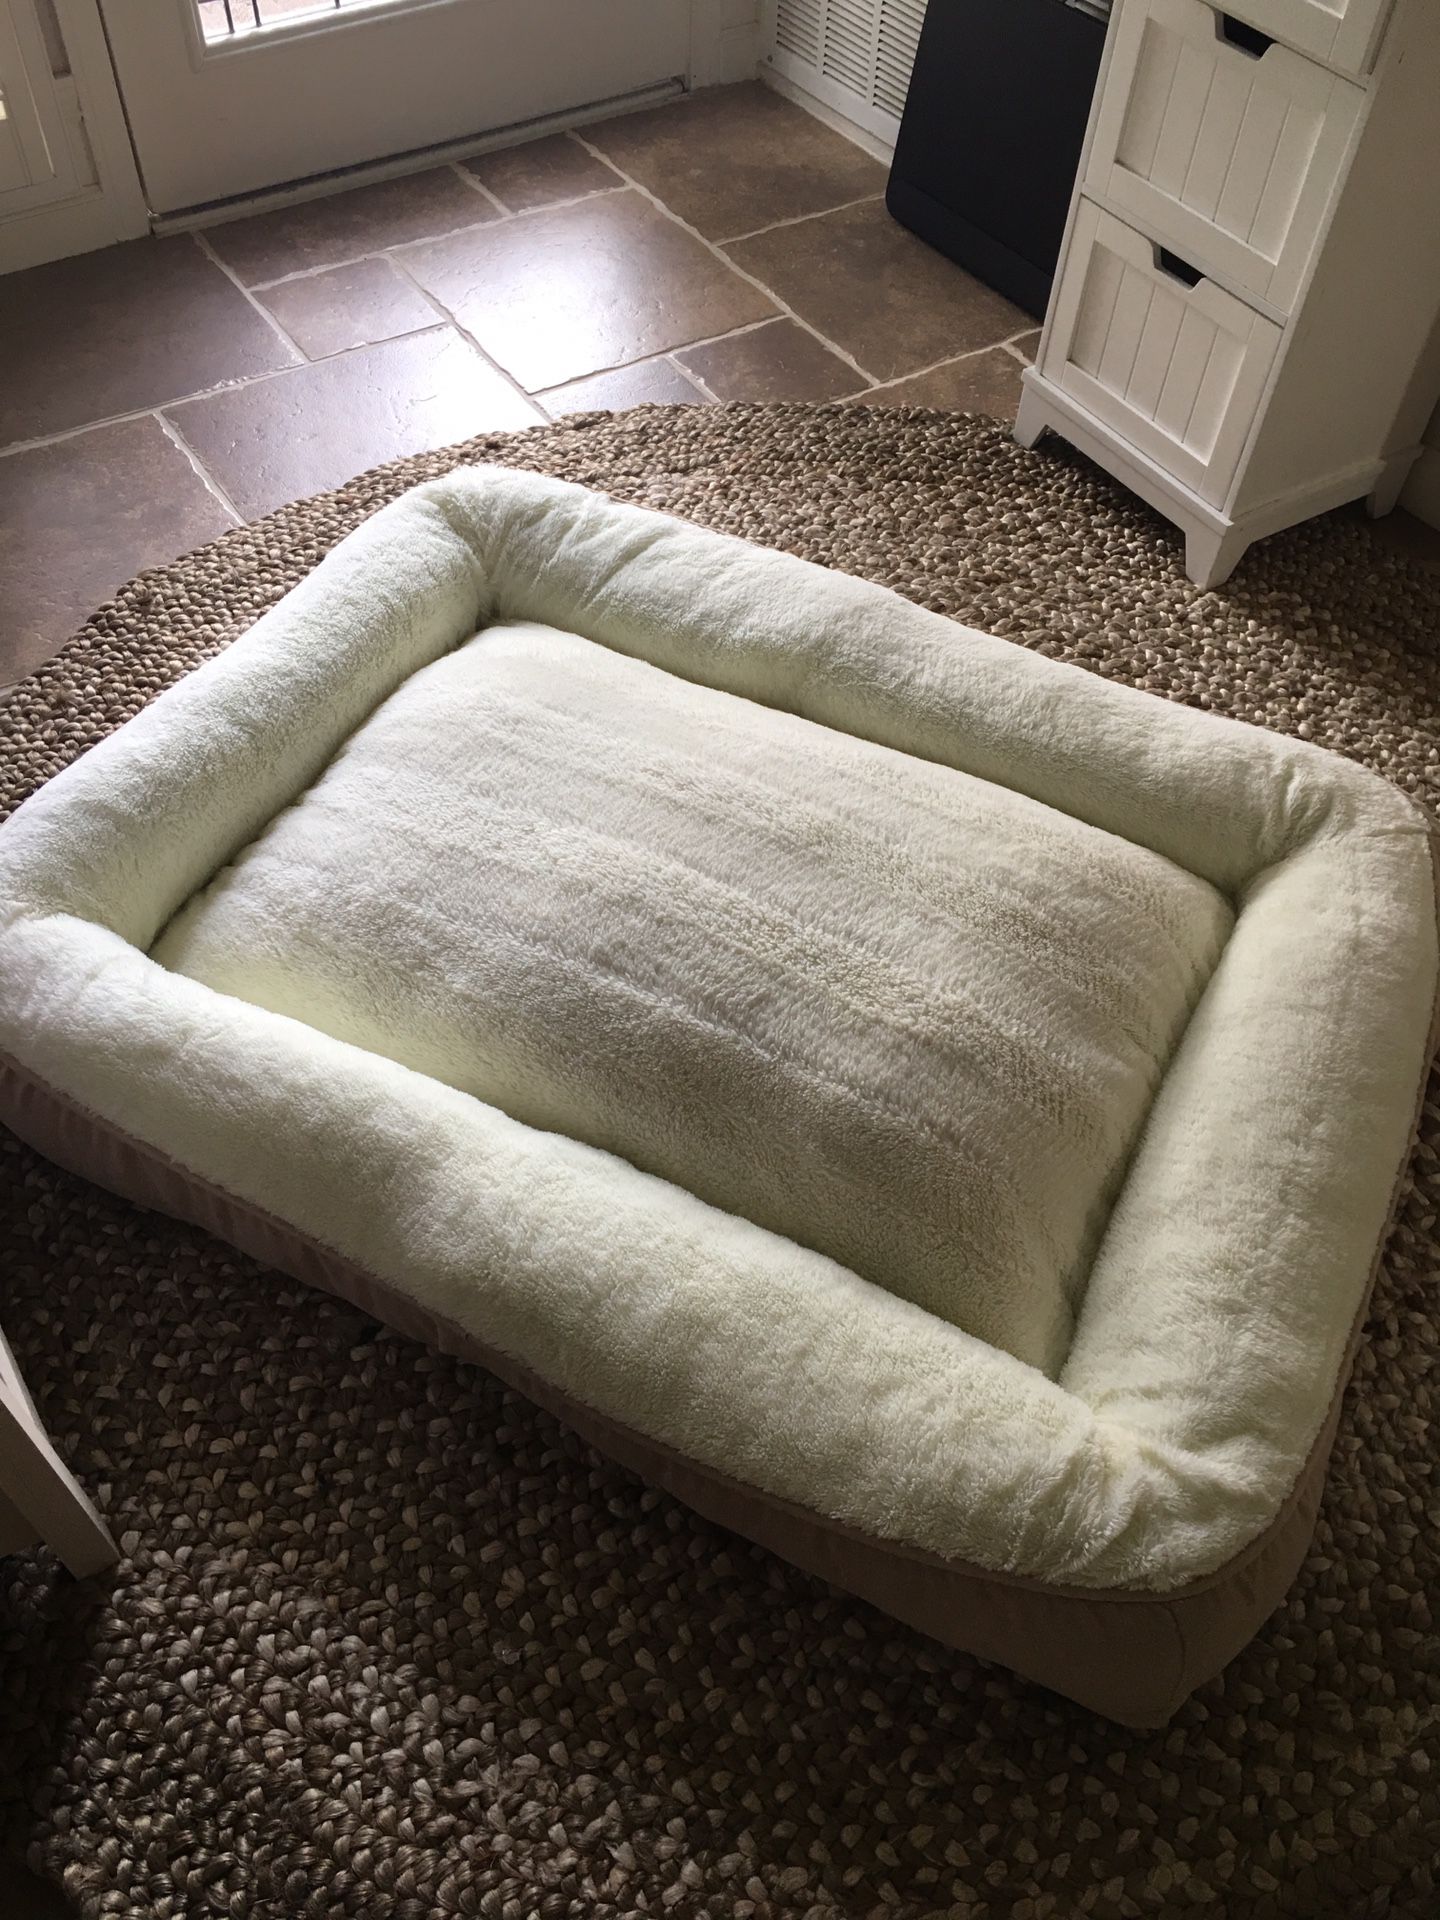 Clean, soft, cozy extra large dog bed!